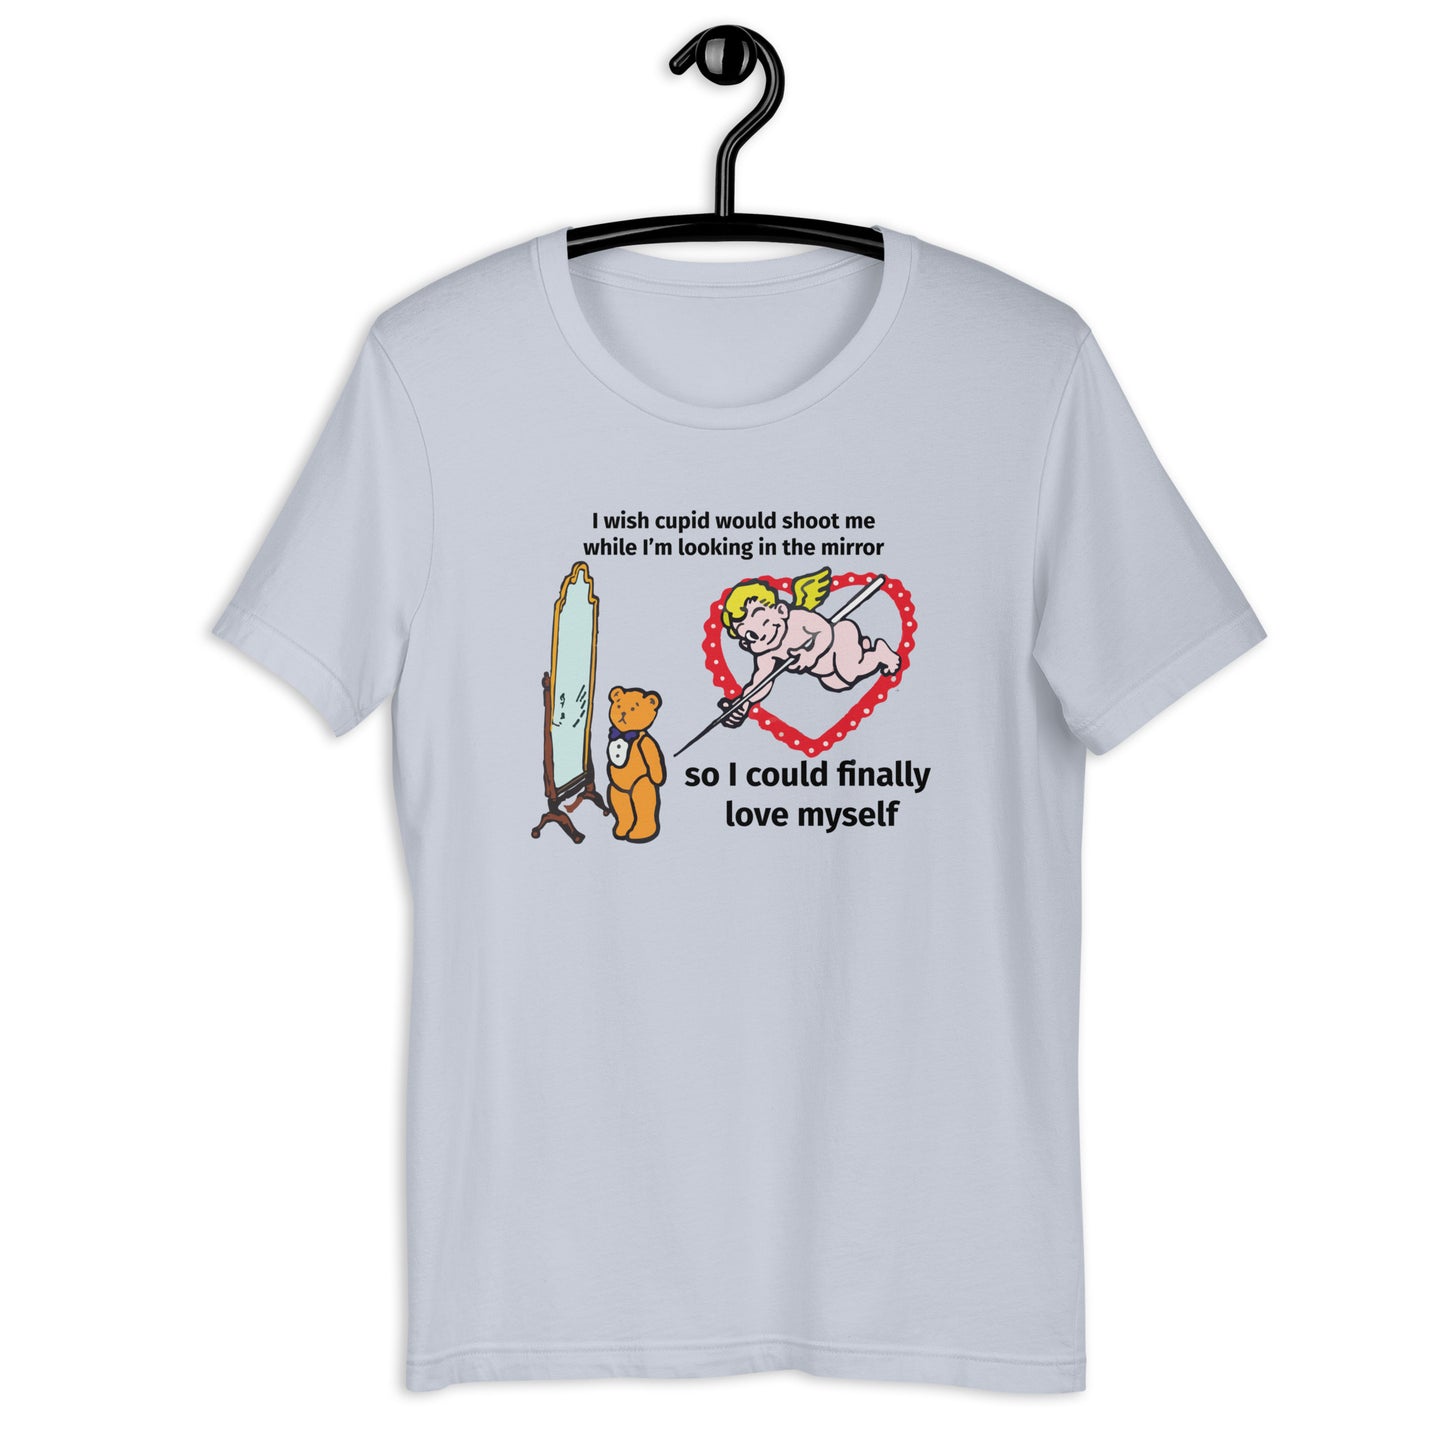 I Wish Cupid Would Shoot Me, So I Could Finally Love Myself.Unisex t-shirt